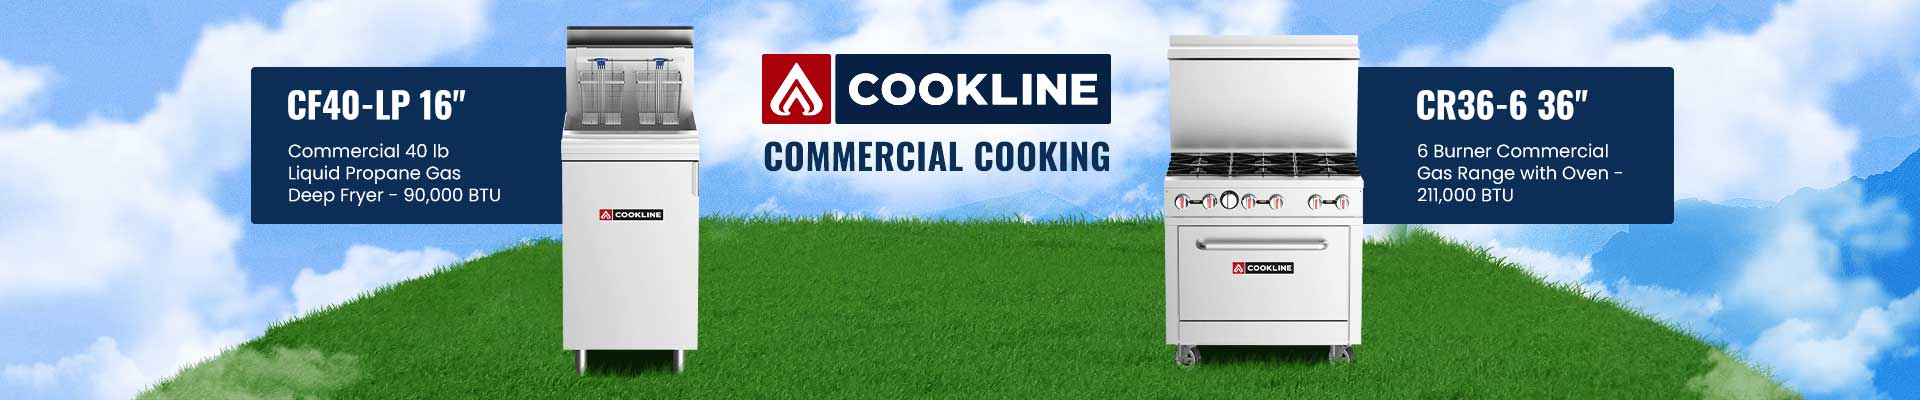 Cookline Gas Commercial Ranges and Fryers